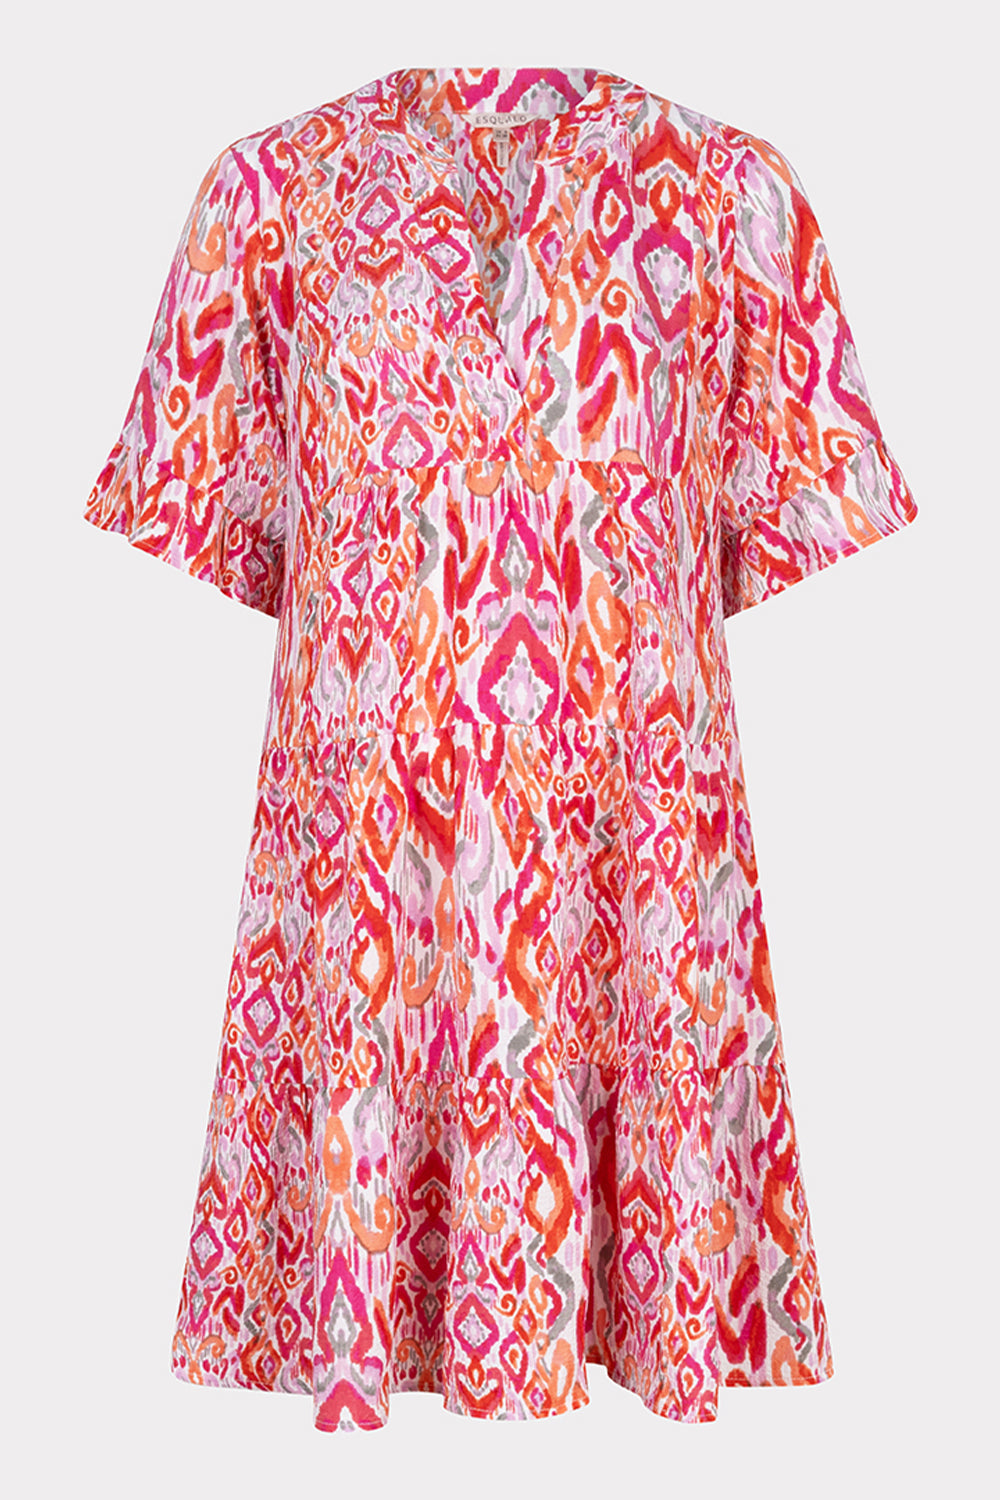 EsQualo (HS2415214) Short Sleeve Pink Ikat Printed Seersucker Dress with tiered mini skirt, split v-neck and a relaxed fit 